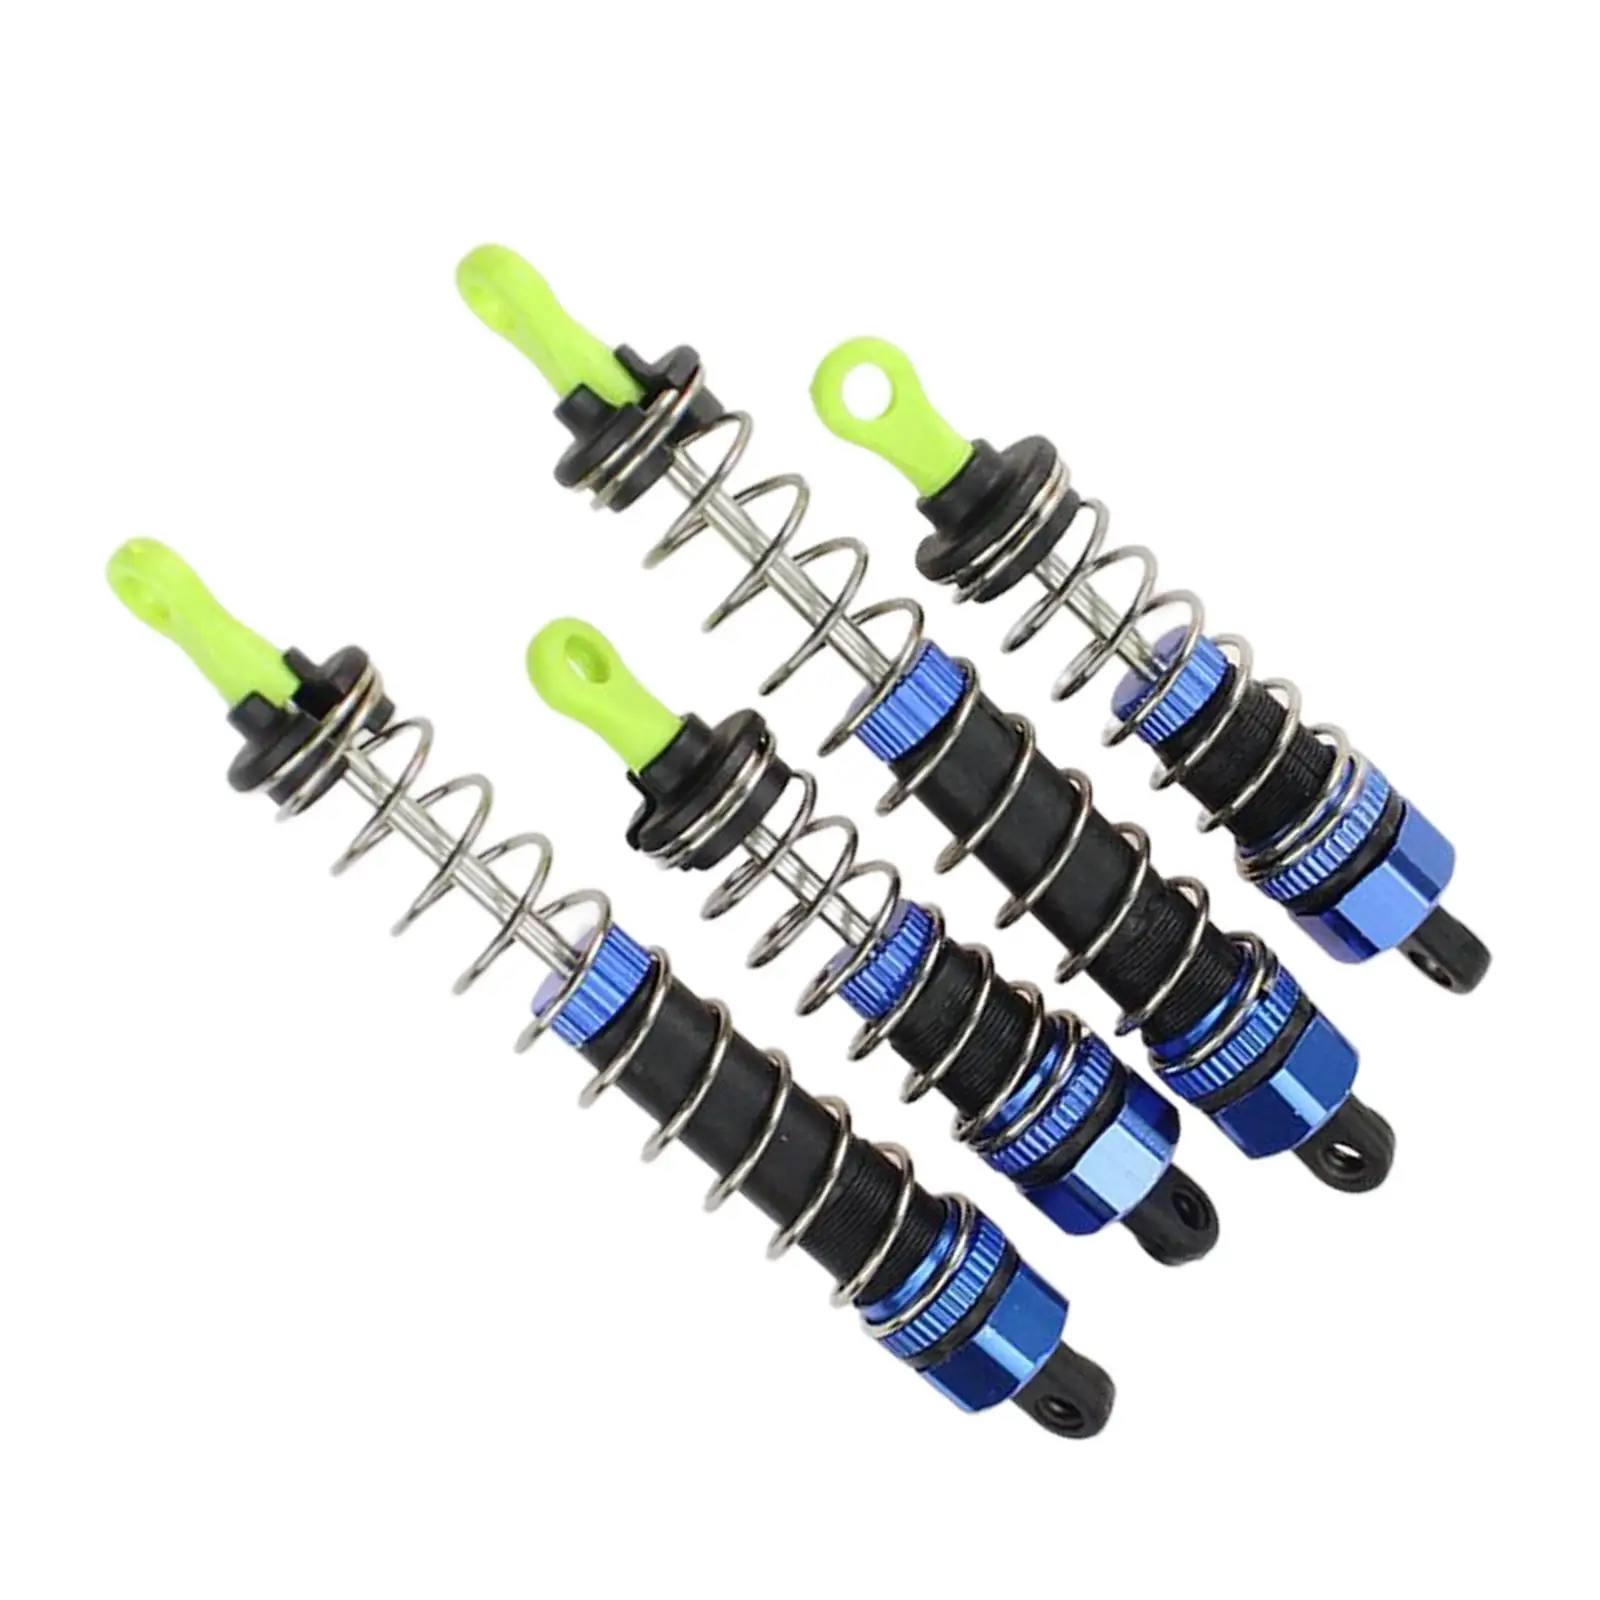 4 Pieces 1/12 Shock Absorber Damper Spare  12427 Vehicles RC  Crawler 